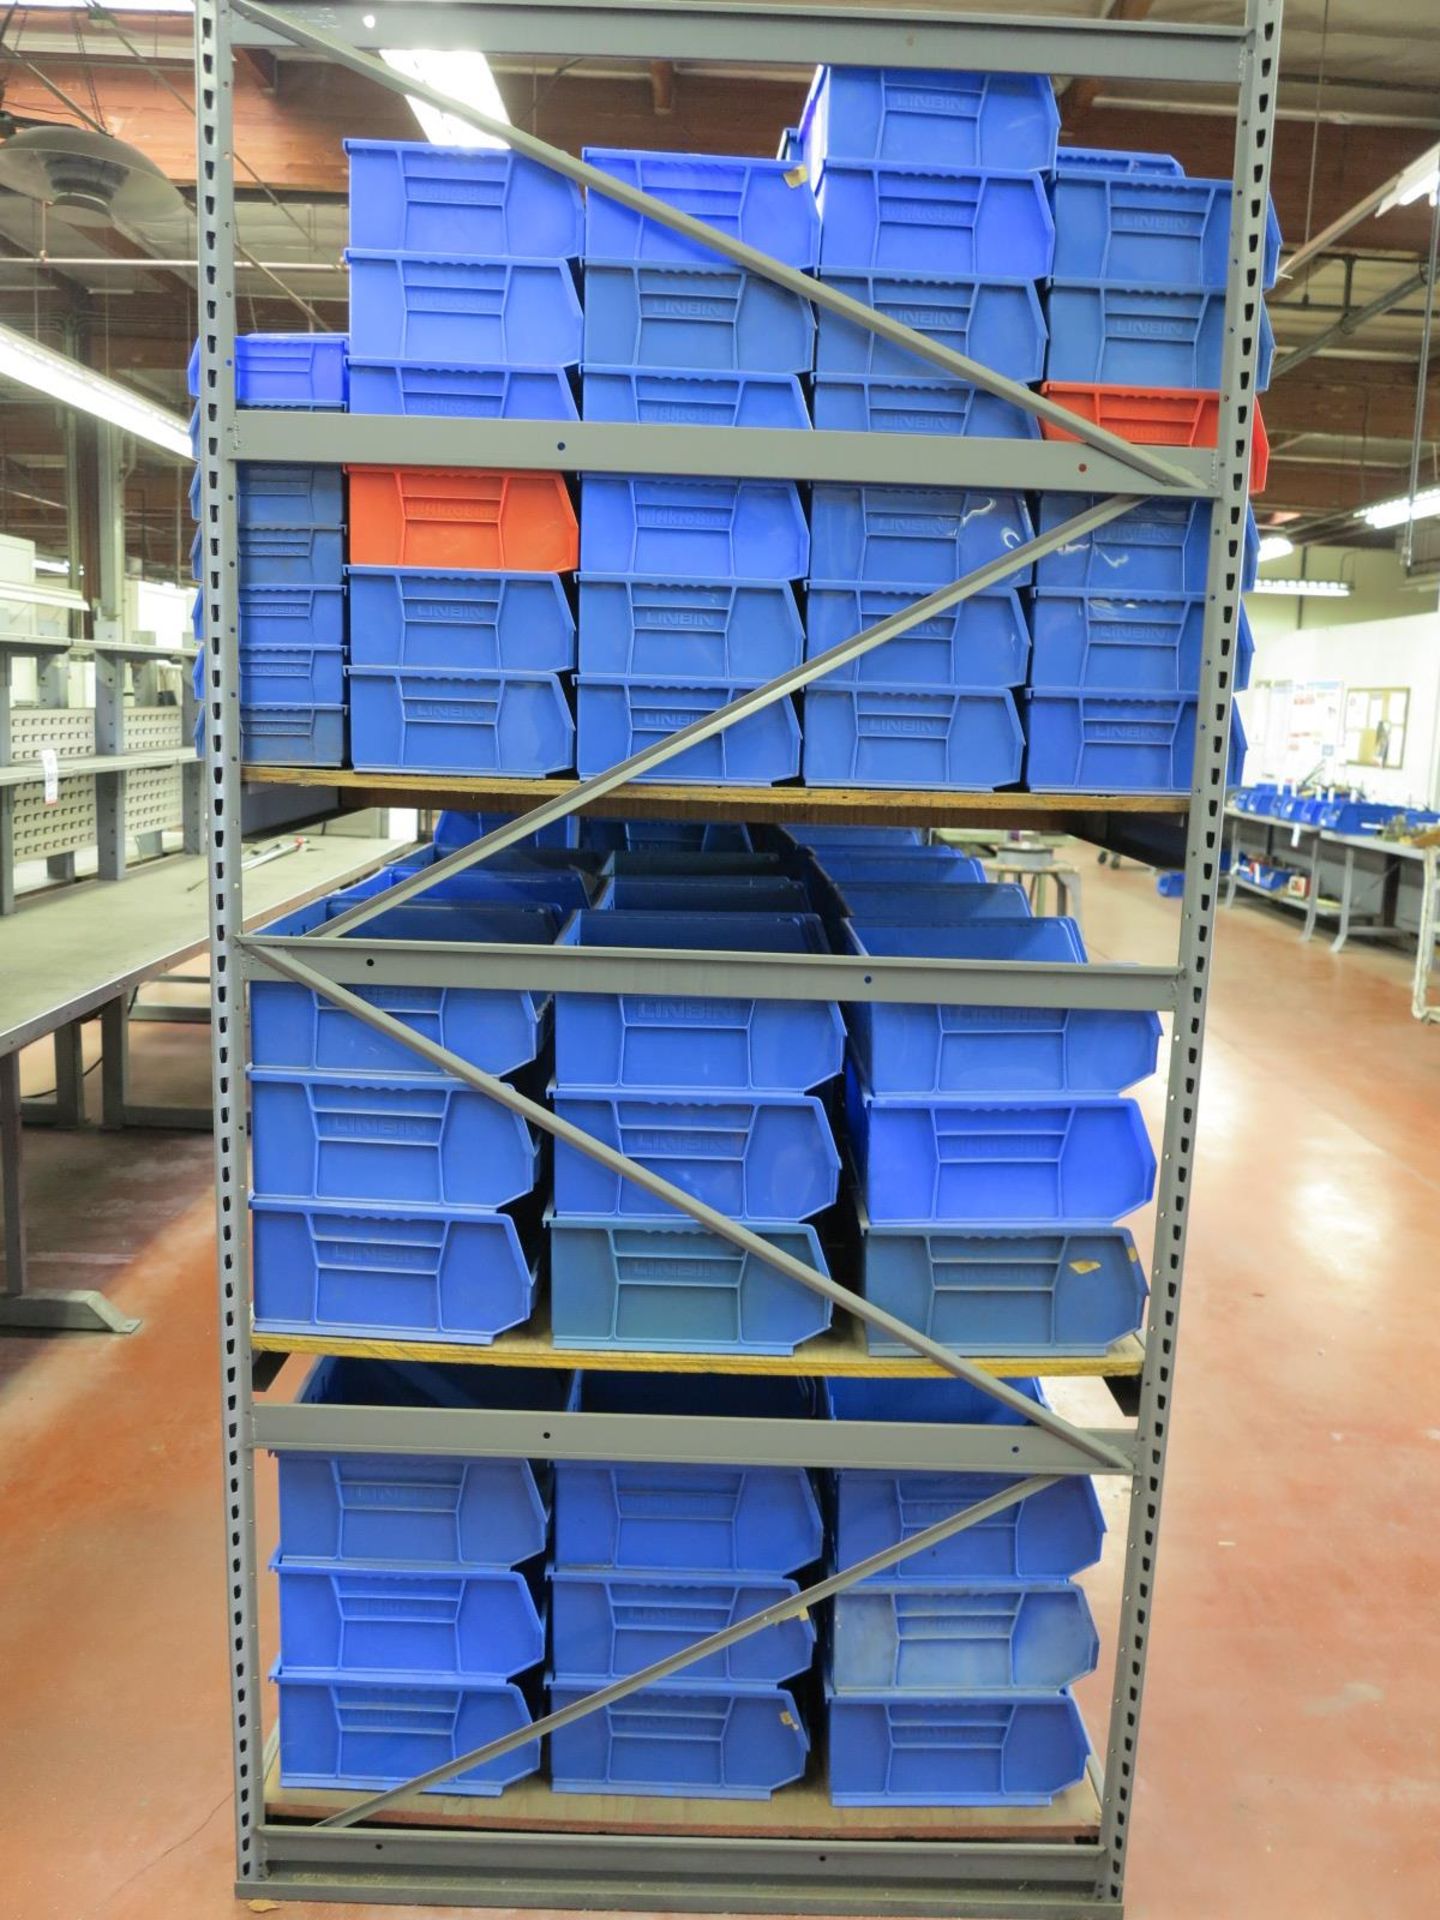 LOT - LARGE AMOUNT OF BLUE PLASTIC PARTS BINS, VARIOUS SIZES - Image 2 of 3